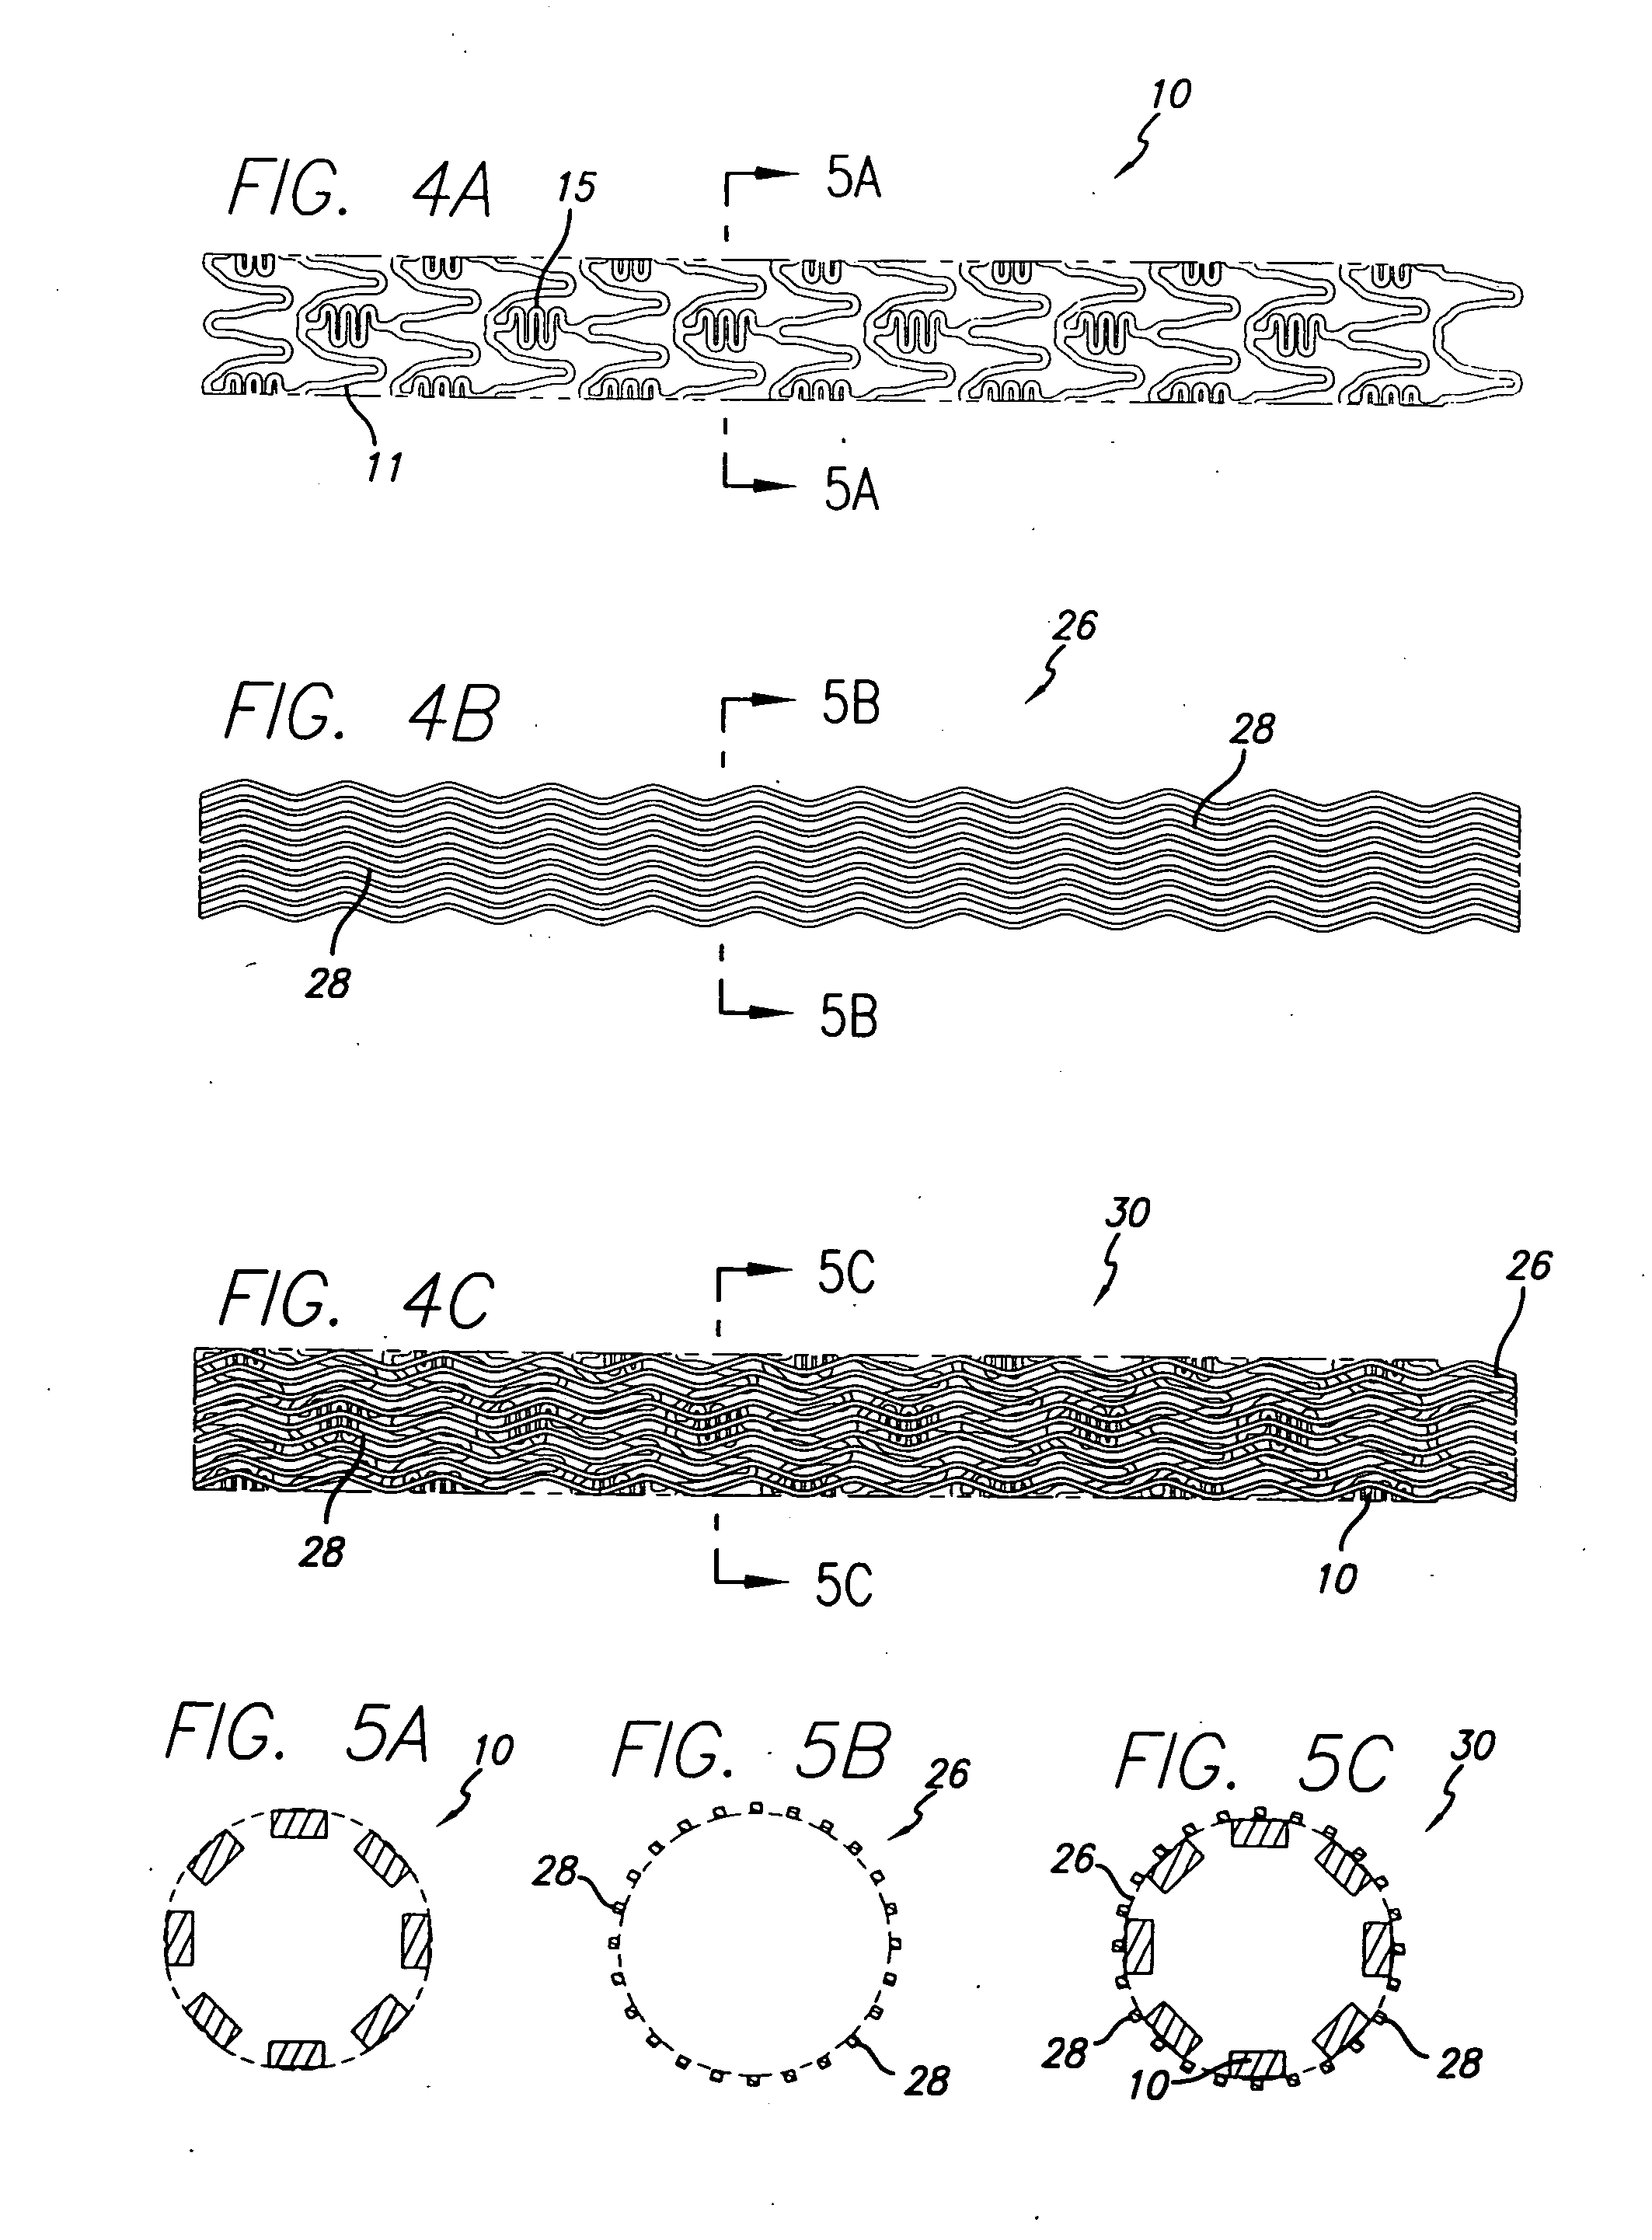 Drug-eluting stent and methods of making the same